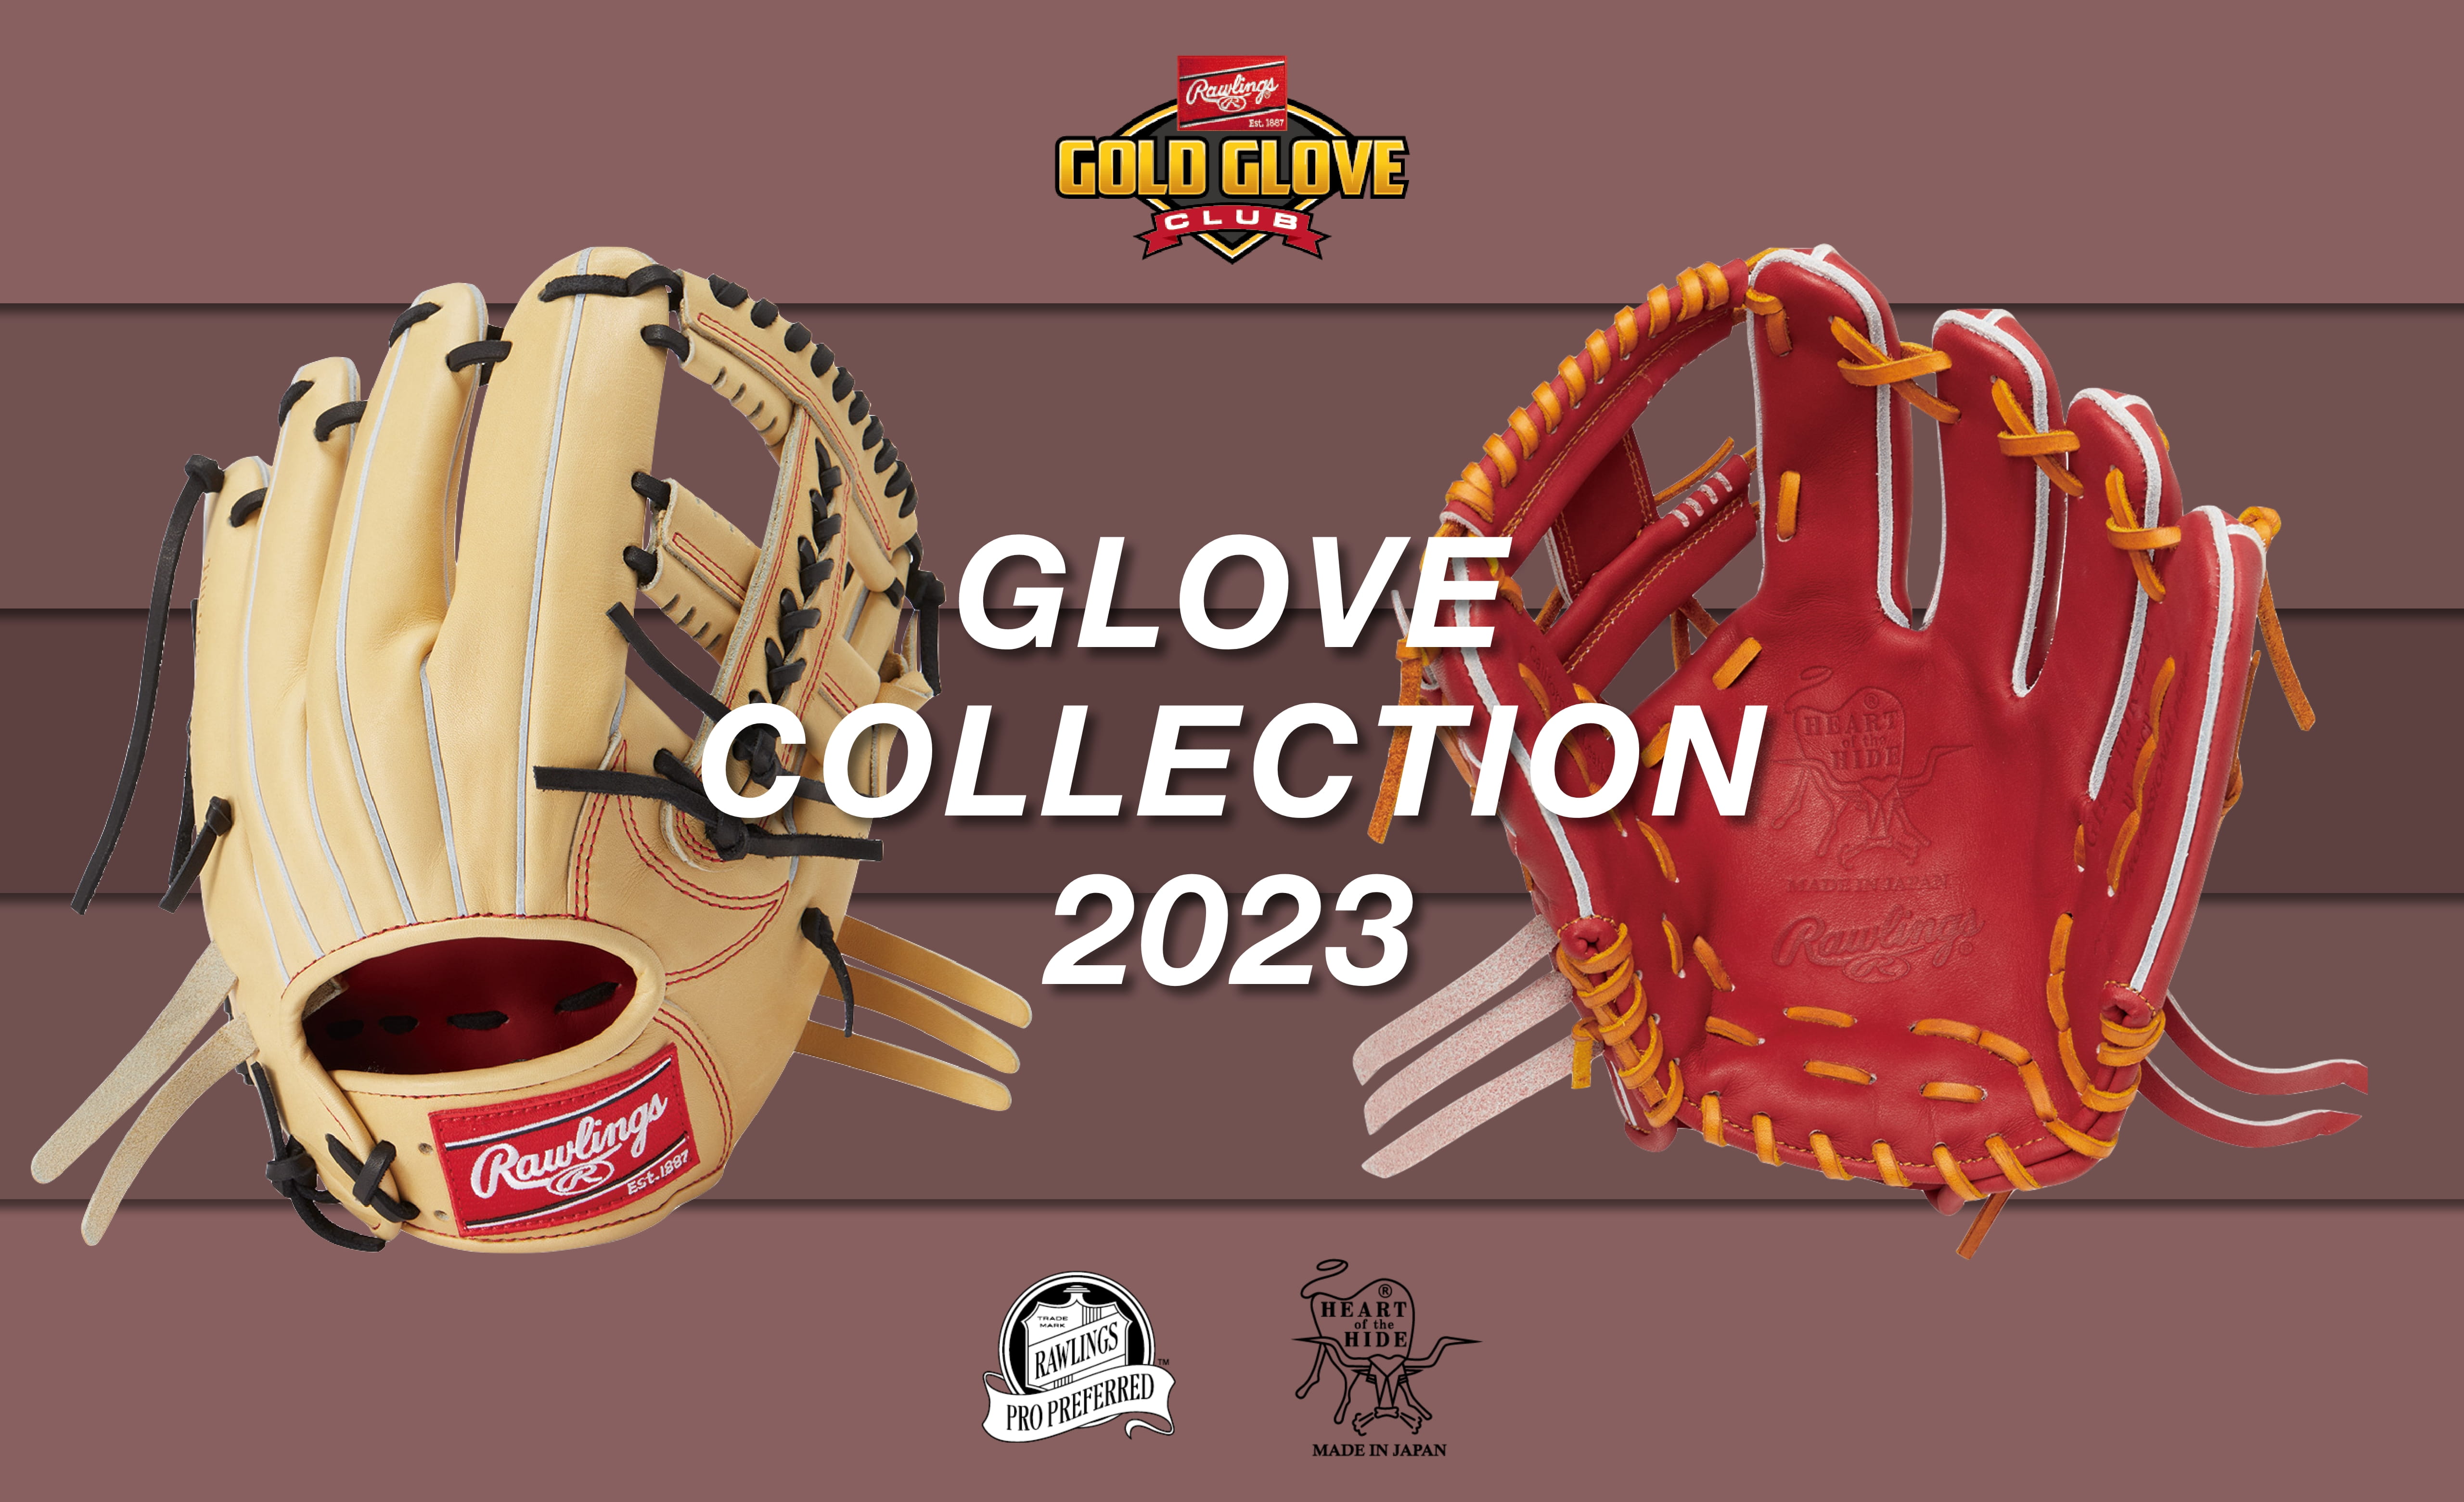 GLOVE COLLECTION 2023